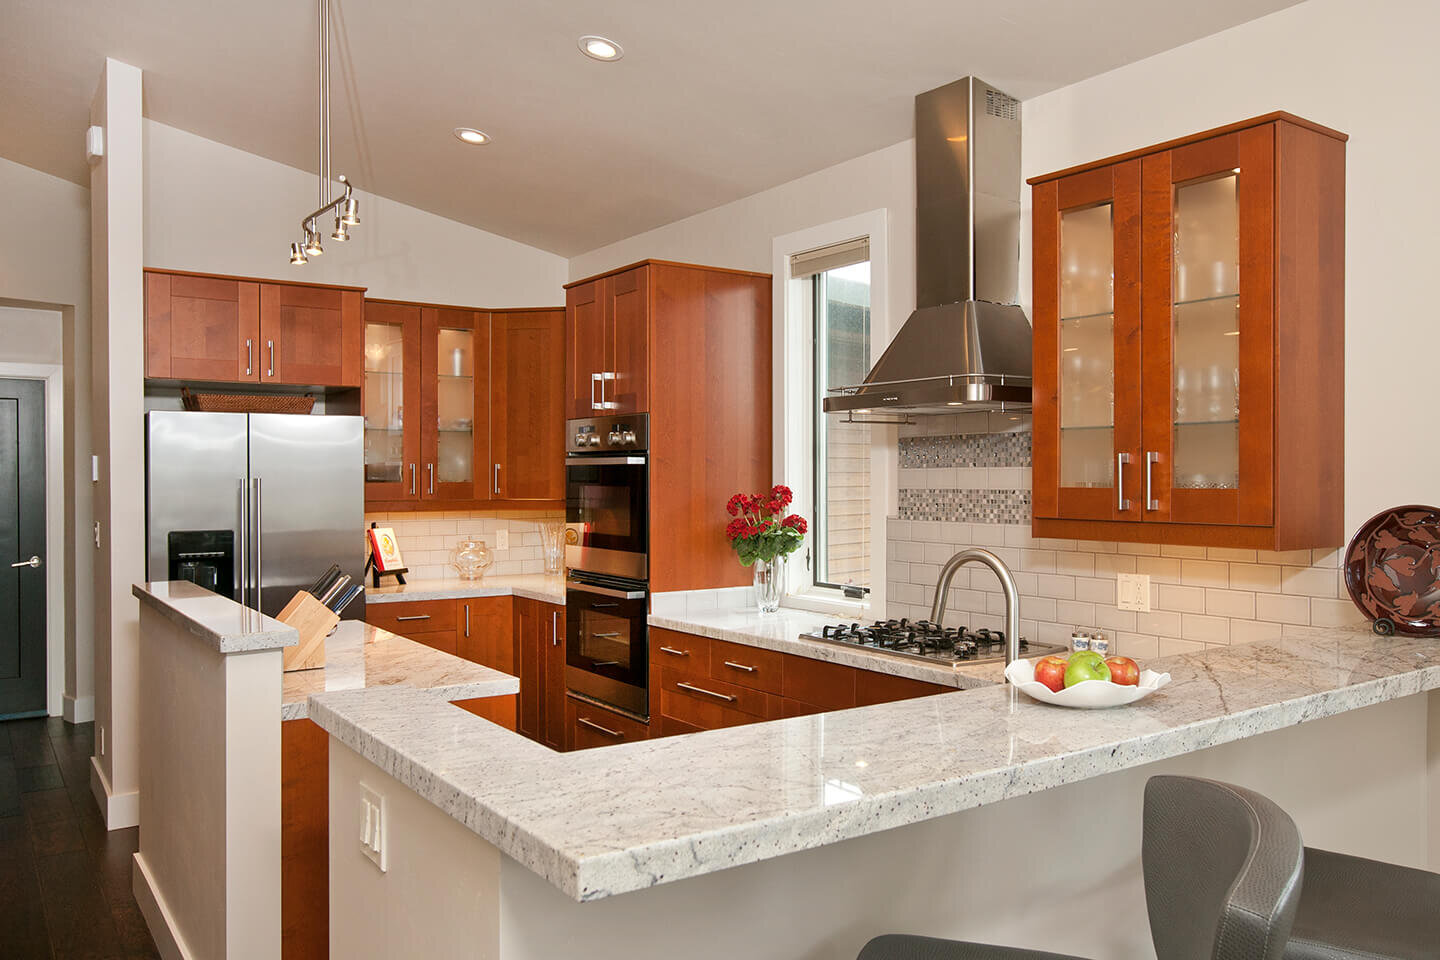 Kitchen with marble counter tops and cherry wood cabinetry